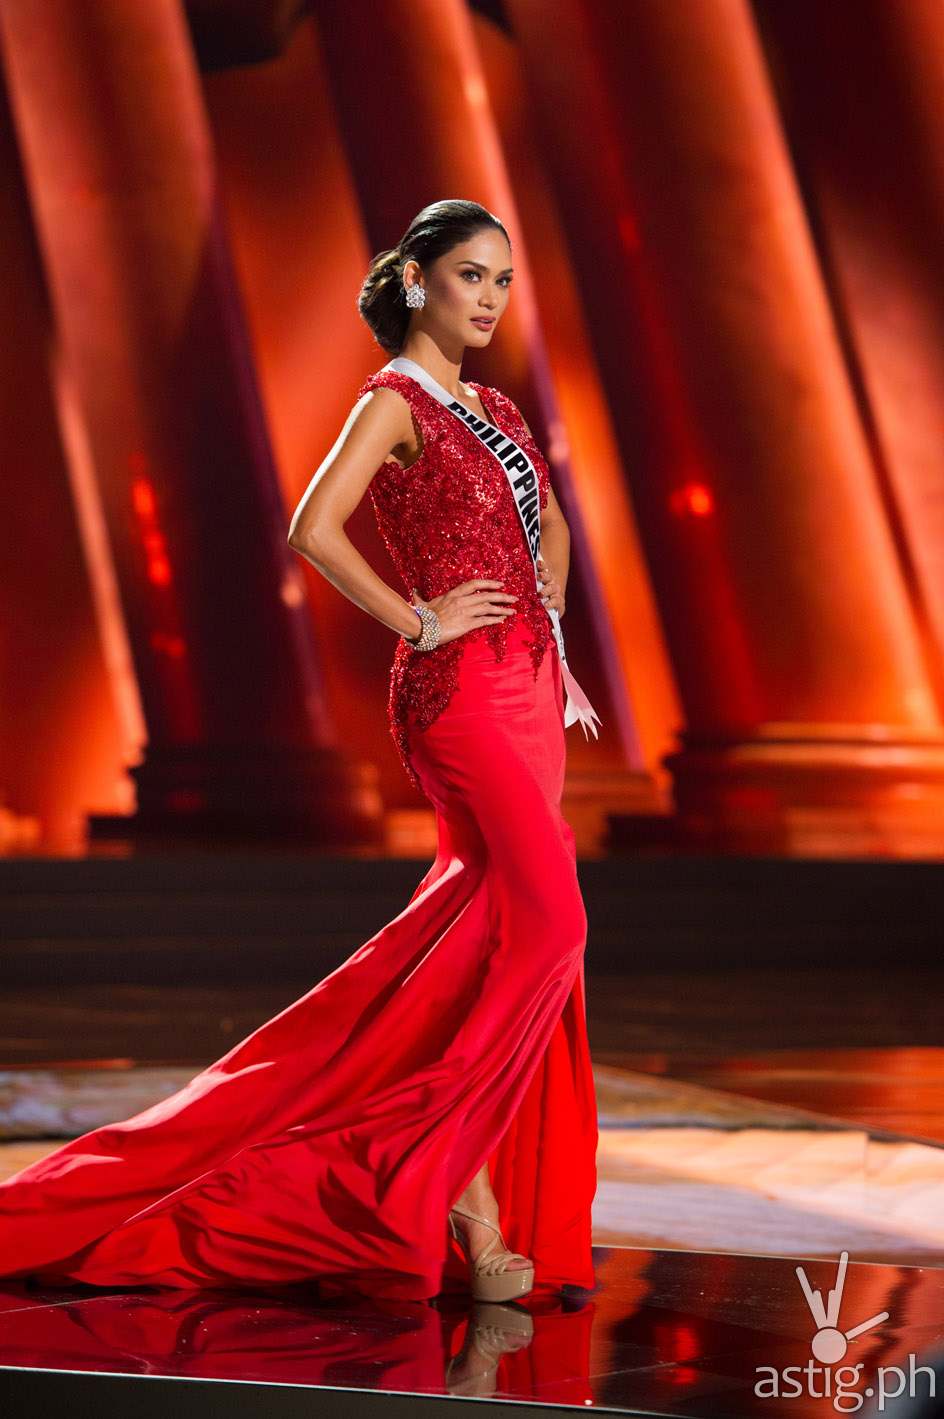 Pia Alonzo Wurtzbach, Miss Philippines 2015, competes on stage in her evening gown during The 2015 MISS UNIVERSE® Preliminary Show at Planet Hollywood Resort & Casino Wednesday, December 16, 2015. The 2015 Miss Universe contestants are touring, filming, rehearsing and preparing to compete for the DIC Crown in Las Vegas. Tune in to the FOX telecast at 7:00 PM ET live/PT tape-delayed on Sunday, Dec. 20, from Planet Hollywood Resort & Casino in Las Vegas to see who will become Miss Universe 2015. HO/The Miss Universe Organization